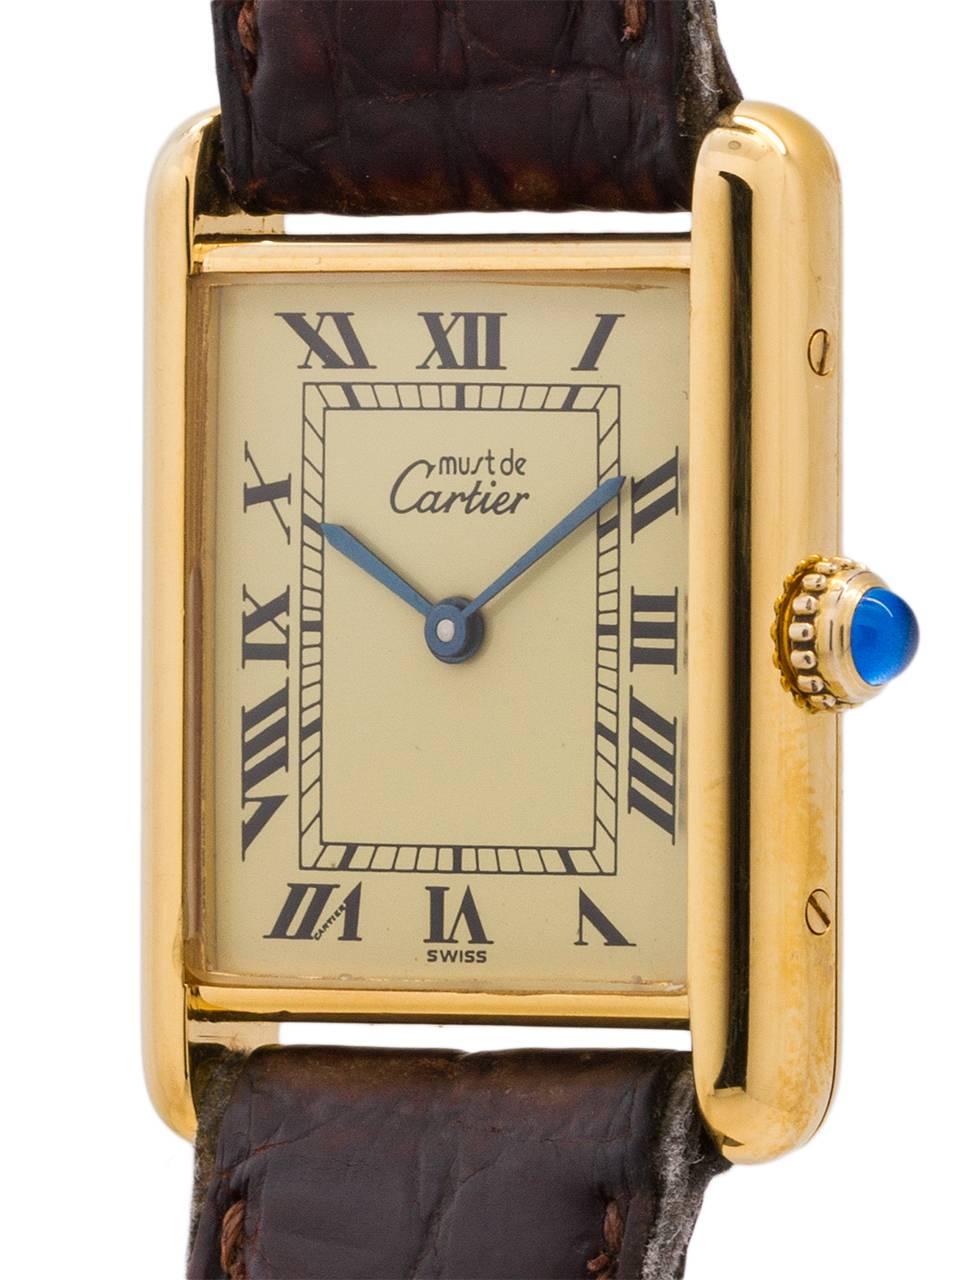 
Cartier Man’s Tank Louis circa 1990s. Featuring 24 x 30mm vermeil (20 microns gold over silver) case secured by 4 side and 4 case back screws. Featuring classic cream color dial signed Must de Cartier with printed black Roman numerals and blued